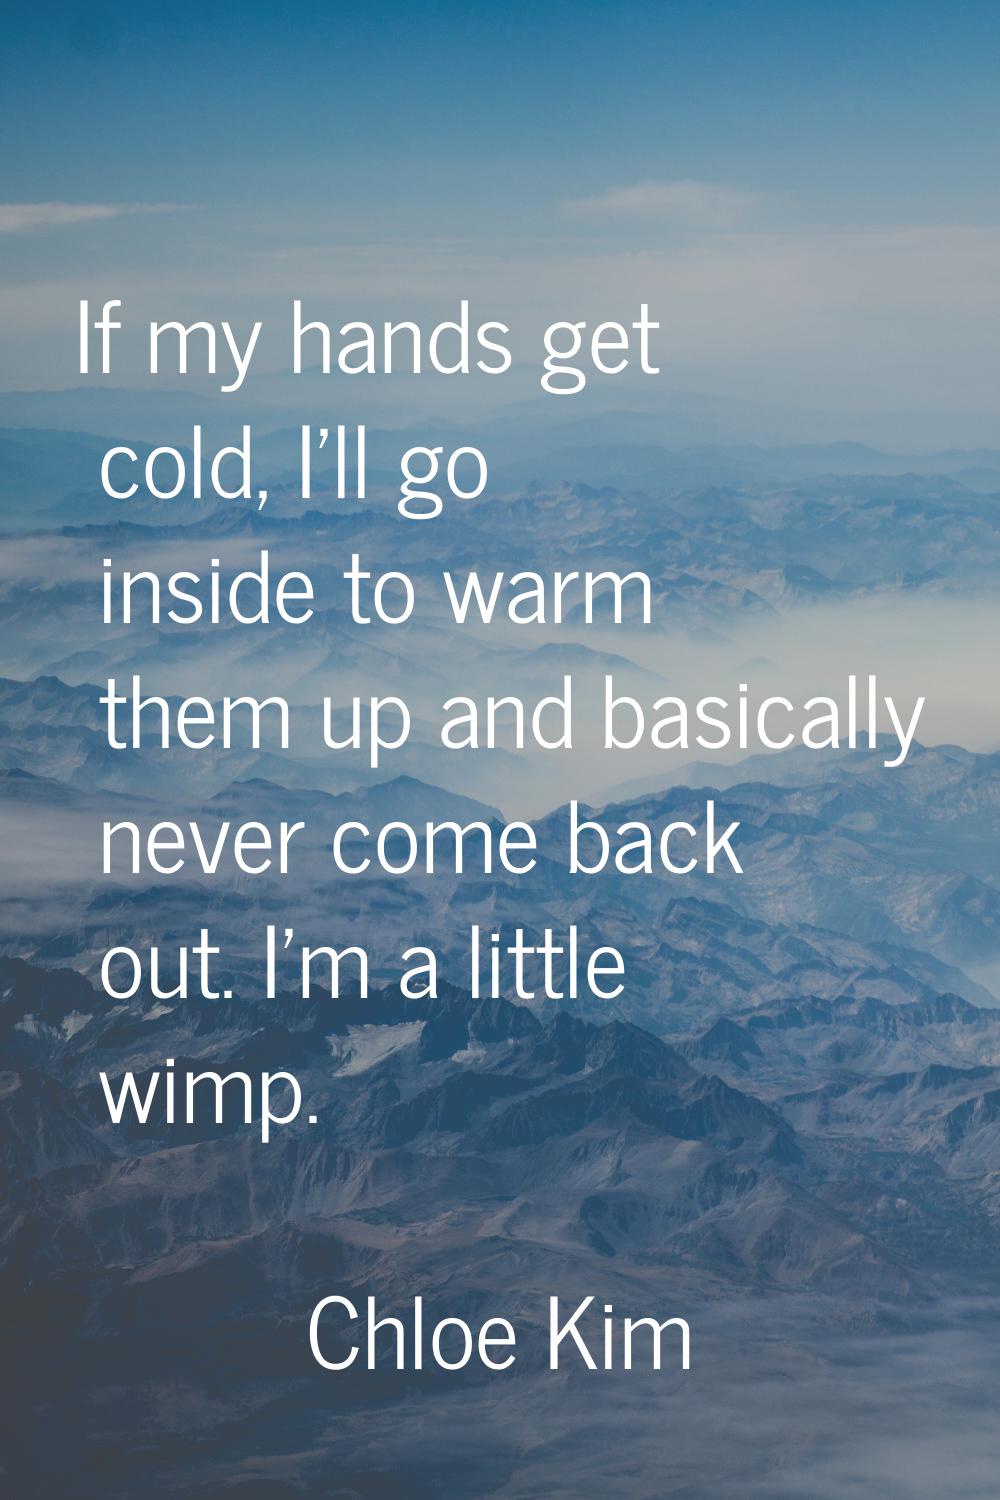 If my hands get cold, I'll go inside to warm them up and basically never come back out. I'm a littl